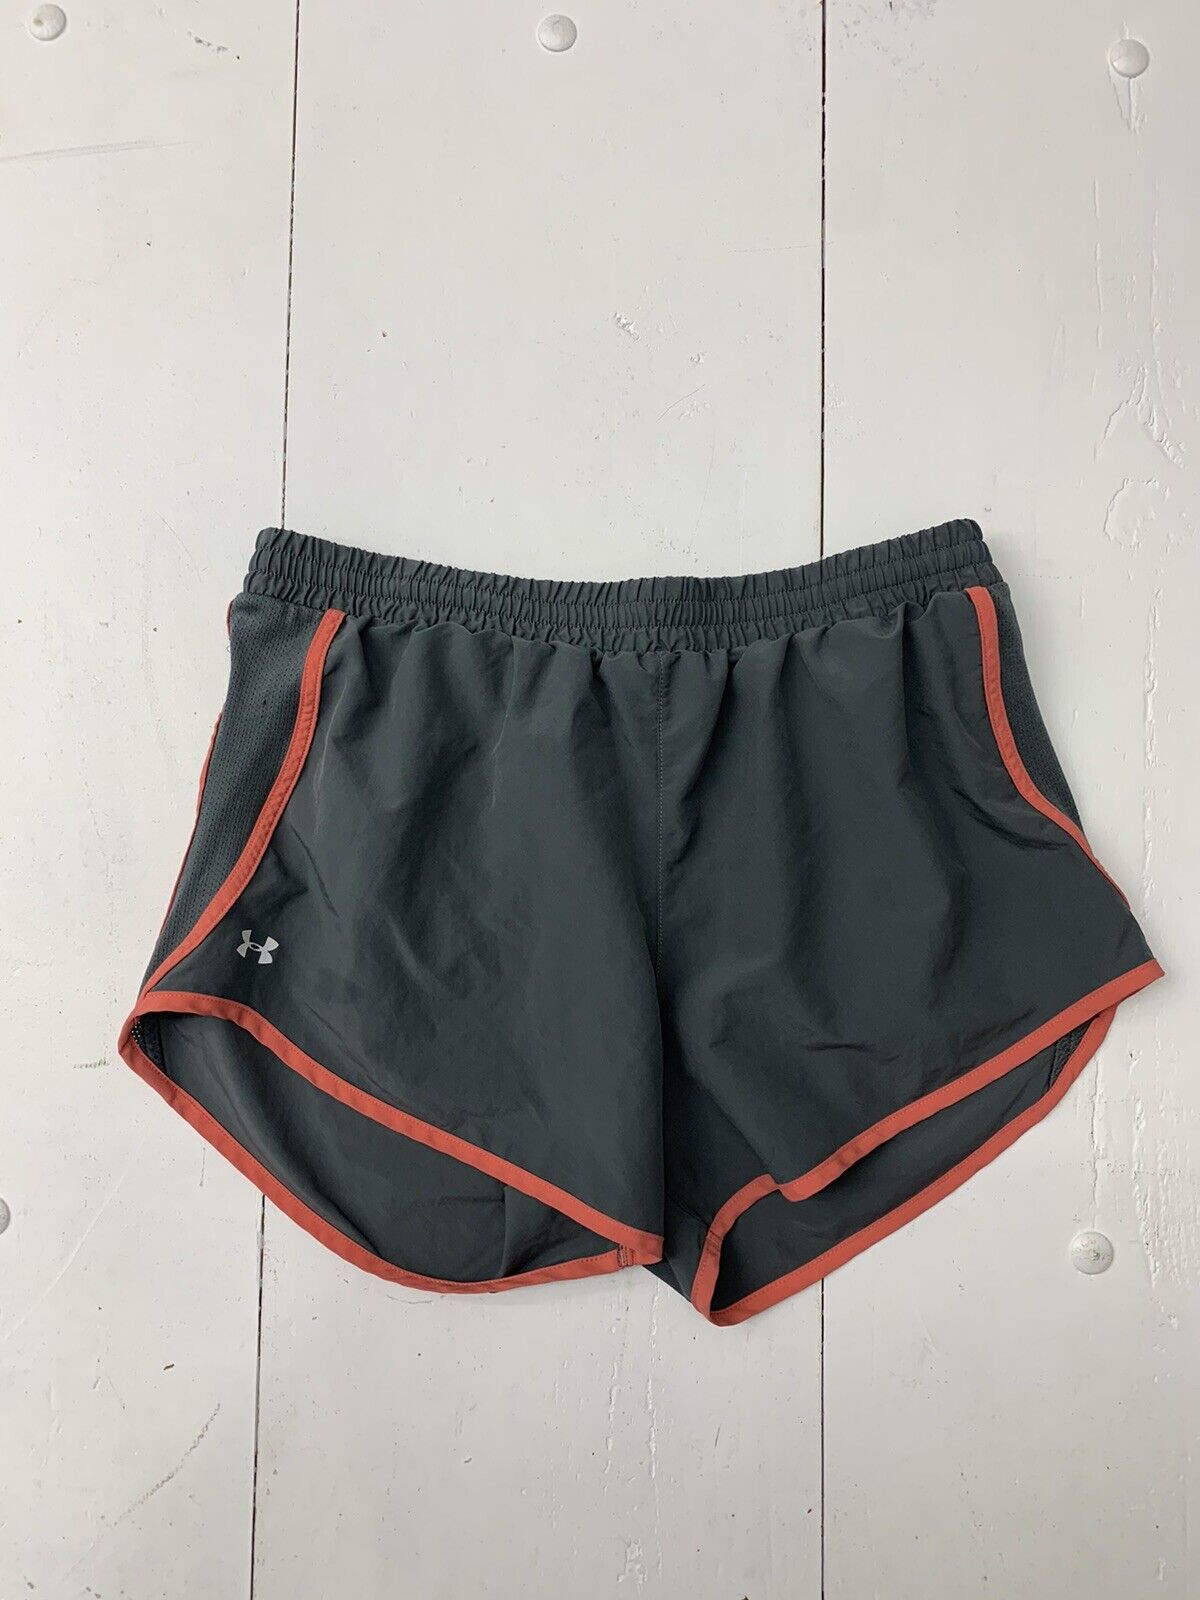 Under Armour Womens Grey Athletic Shorts Size Large - beyond exchange